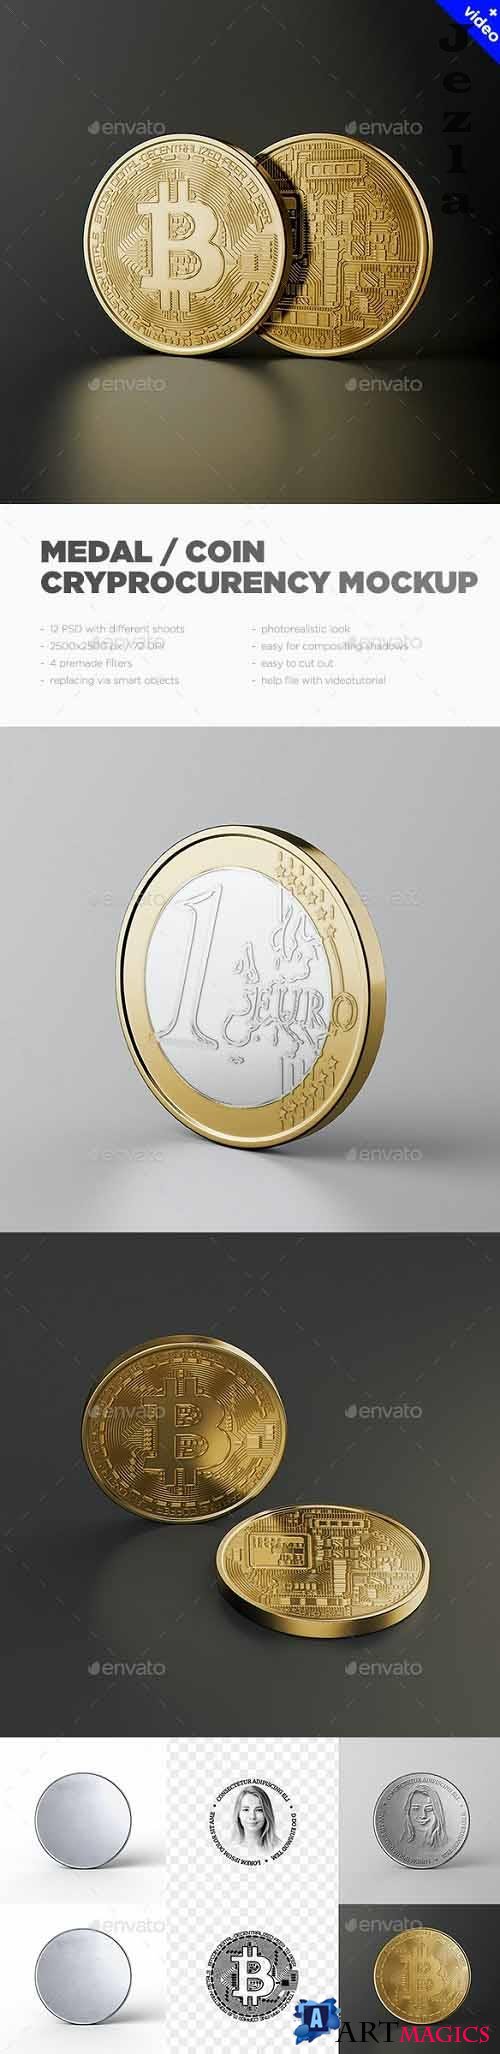 Medal / Coin / Cryprocurency MockUp - 32332303 - 6176624